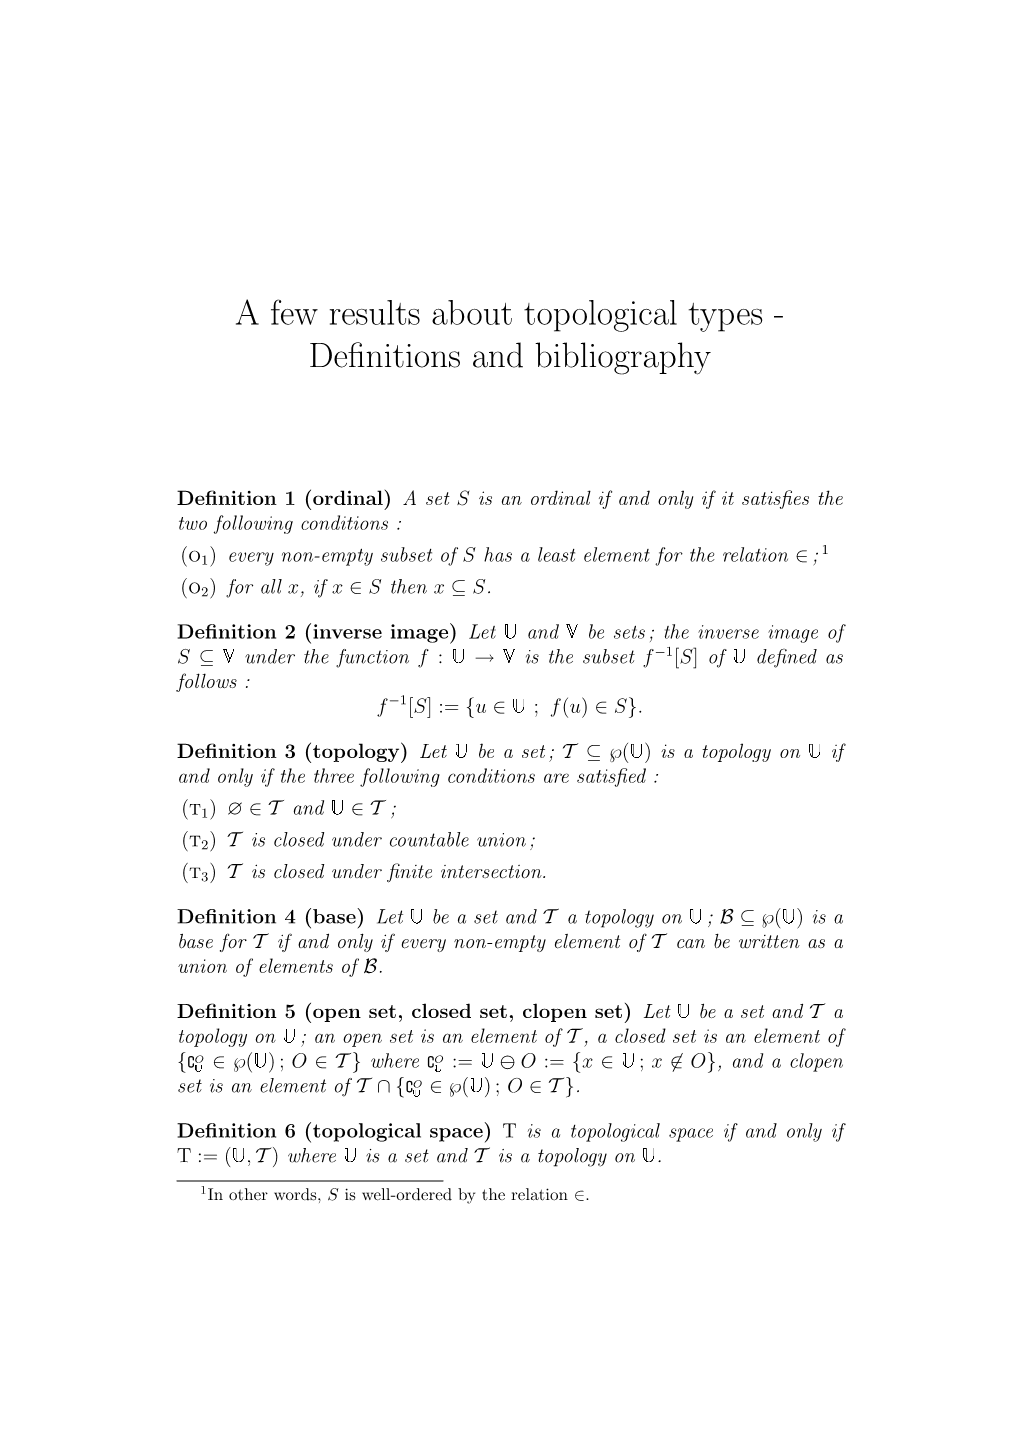 A Few Results About Topological Types - Deﬁnitions and Bibliography